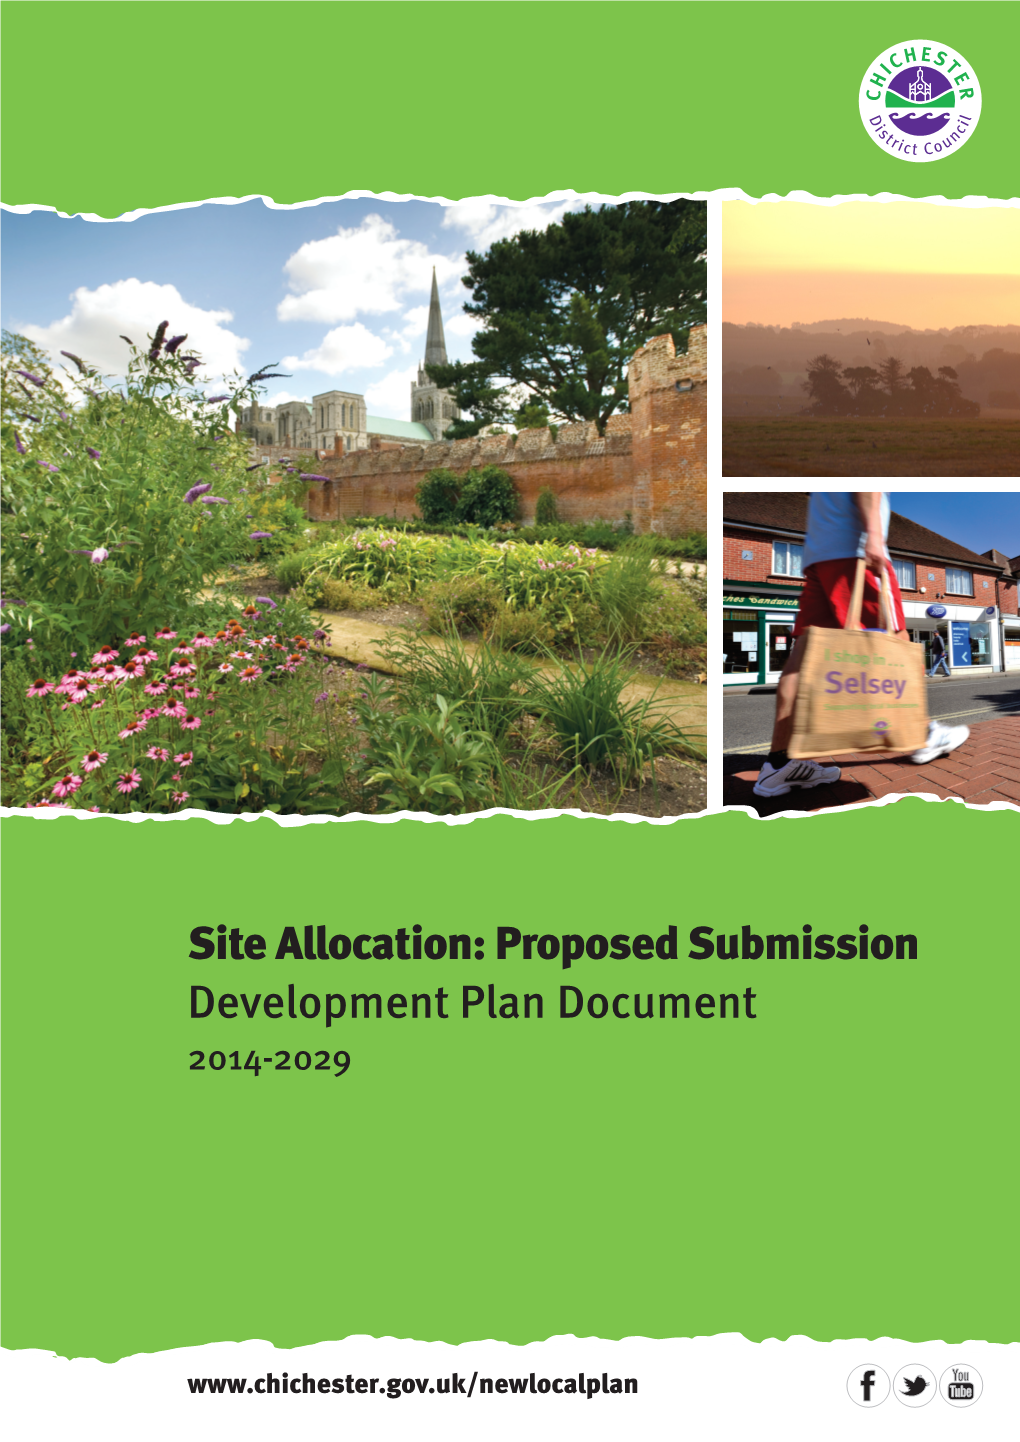 Site Allocation: Proposed Submission Development Plan Document 2014-2029